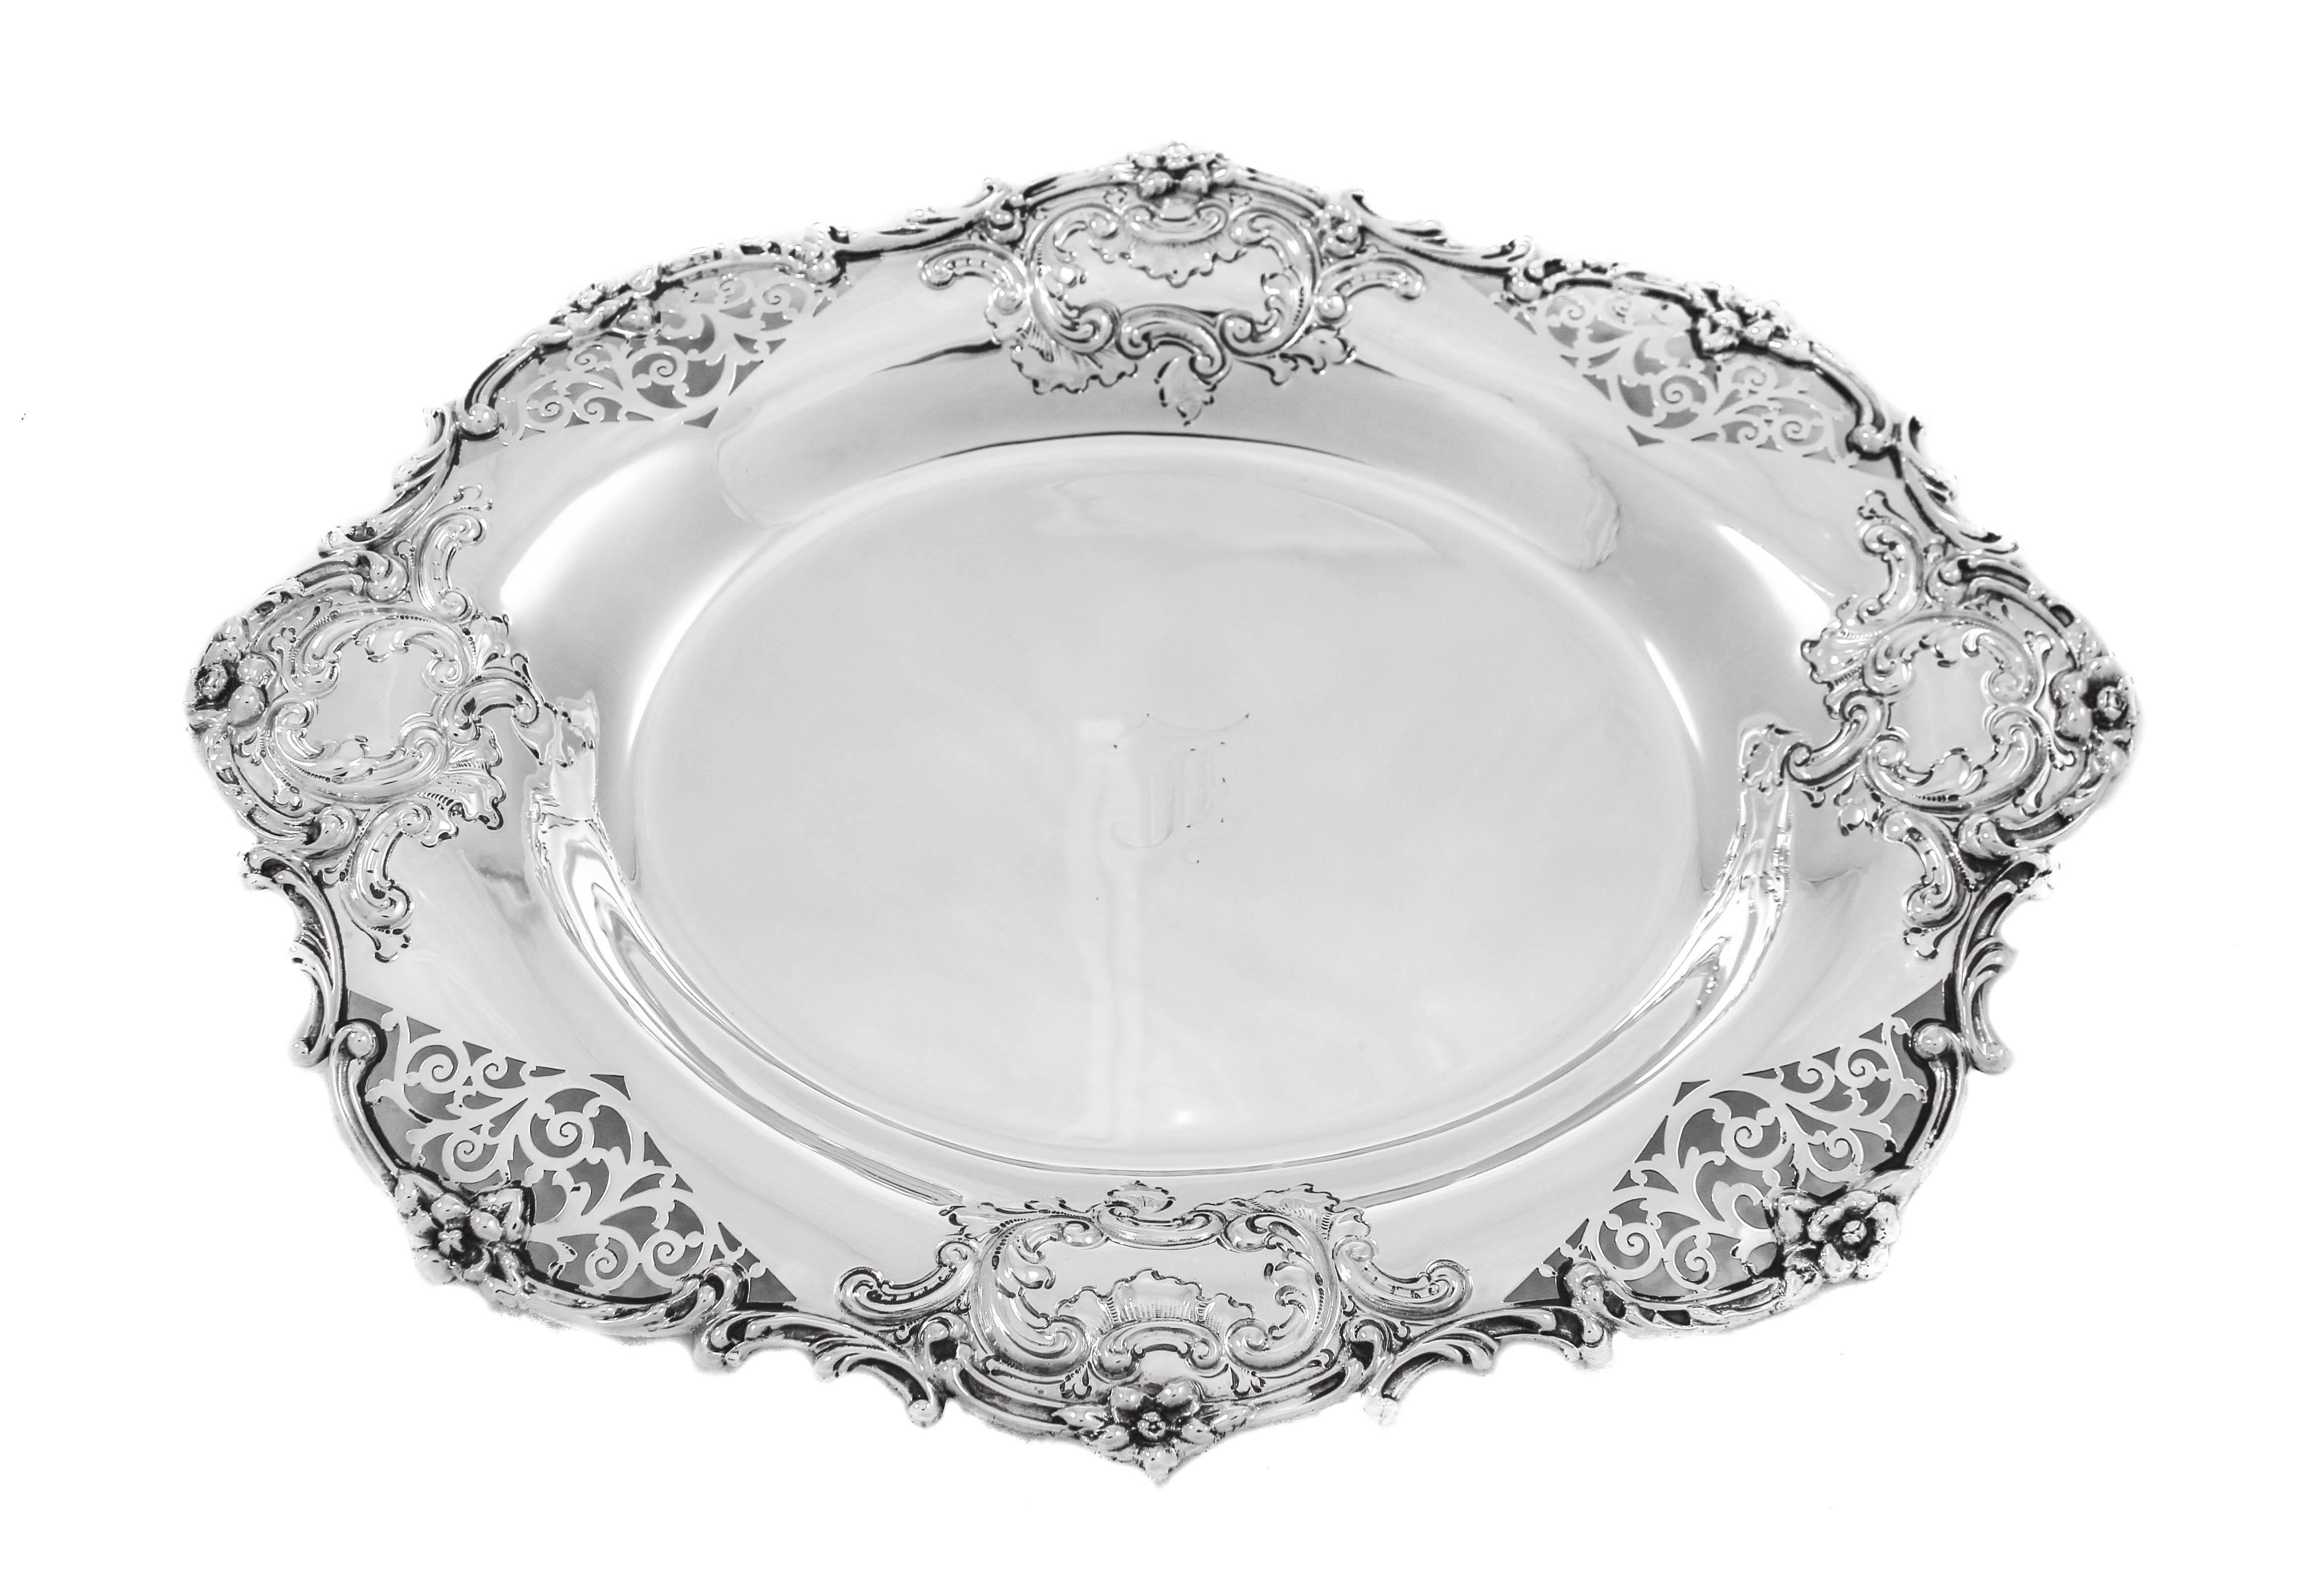 We are proud to offer this sterling silver dish by Dominick and Haff signed 1892. That’s one hundred and twenty nine years ago...Grover Cleveland was elected President over Benjamin Harrison and the Union had only 44 states. A lot has changed since